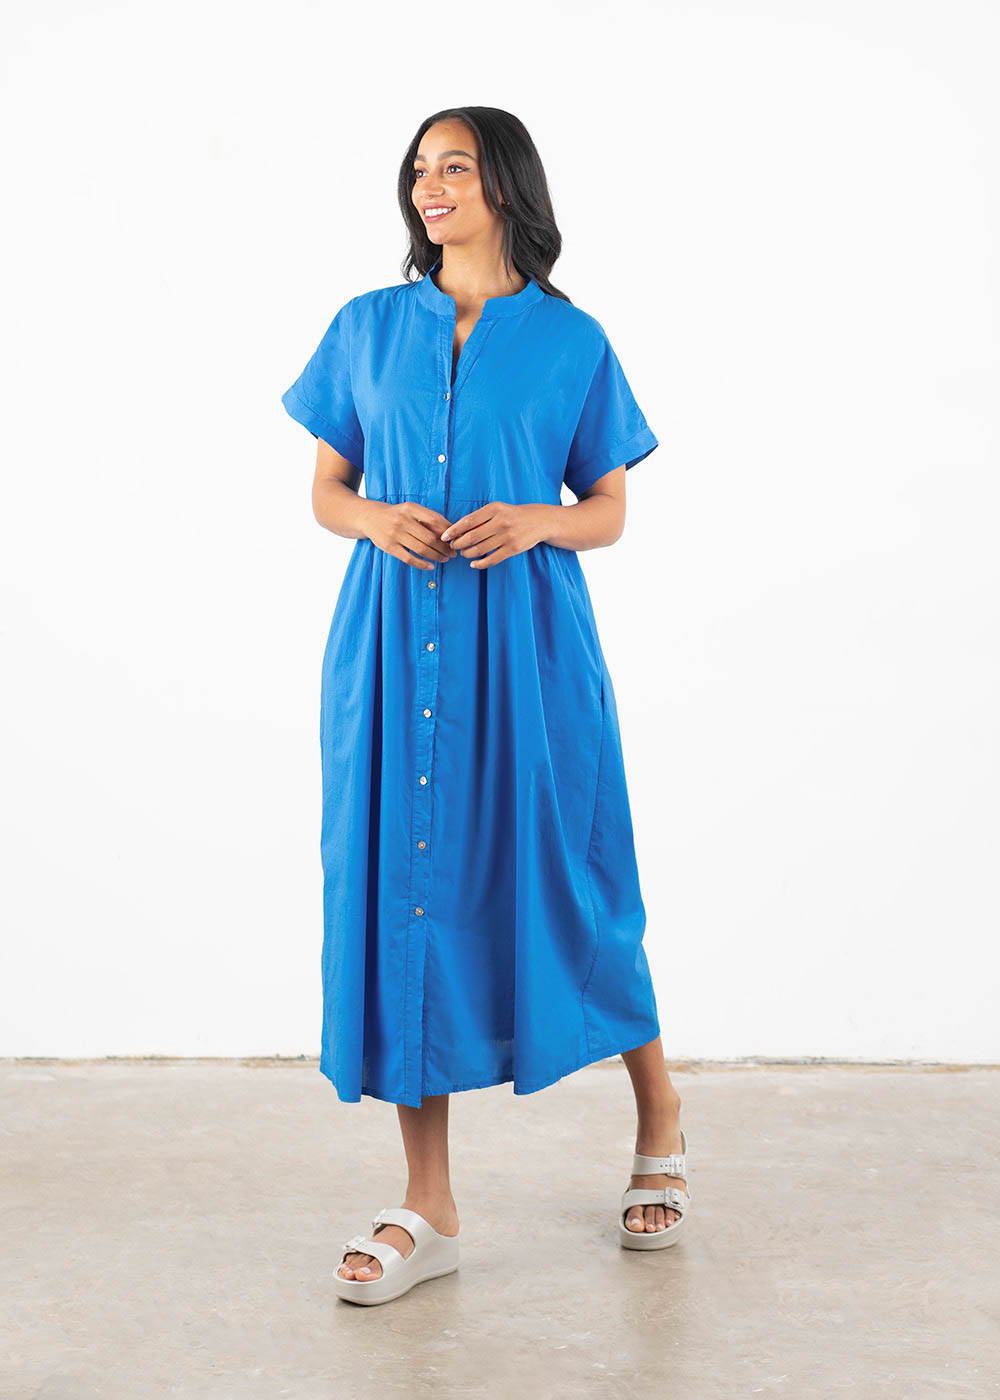 A model wearing a loose, oversized midi dress in a vibrant cobalt blue